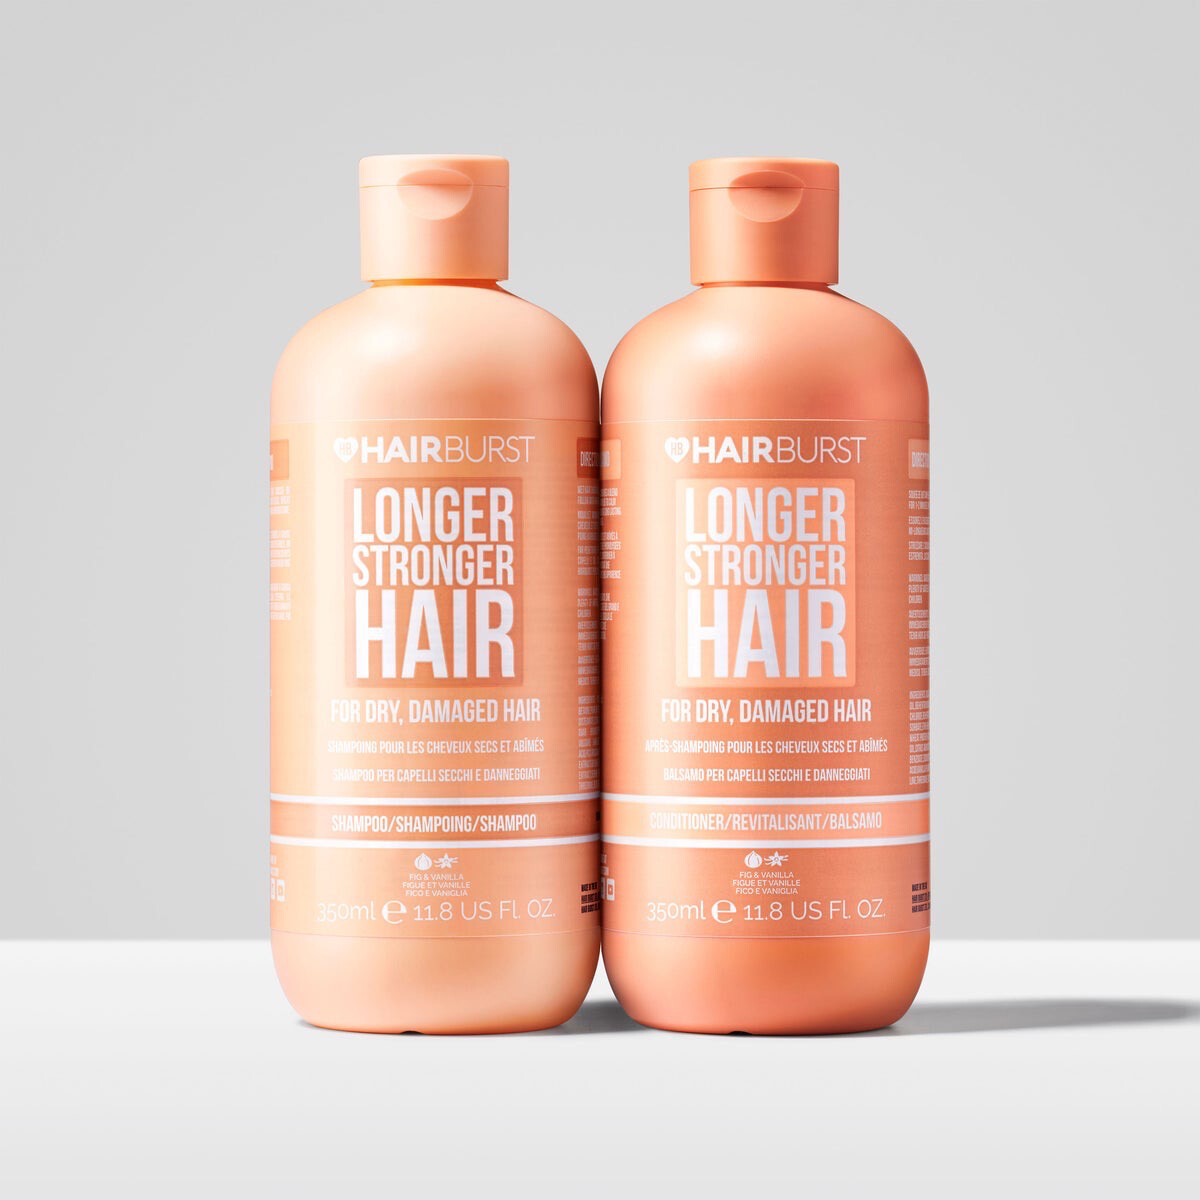 Hairburst - Shampoo & Conditioner for Dry & Damaged Hair